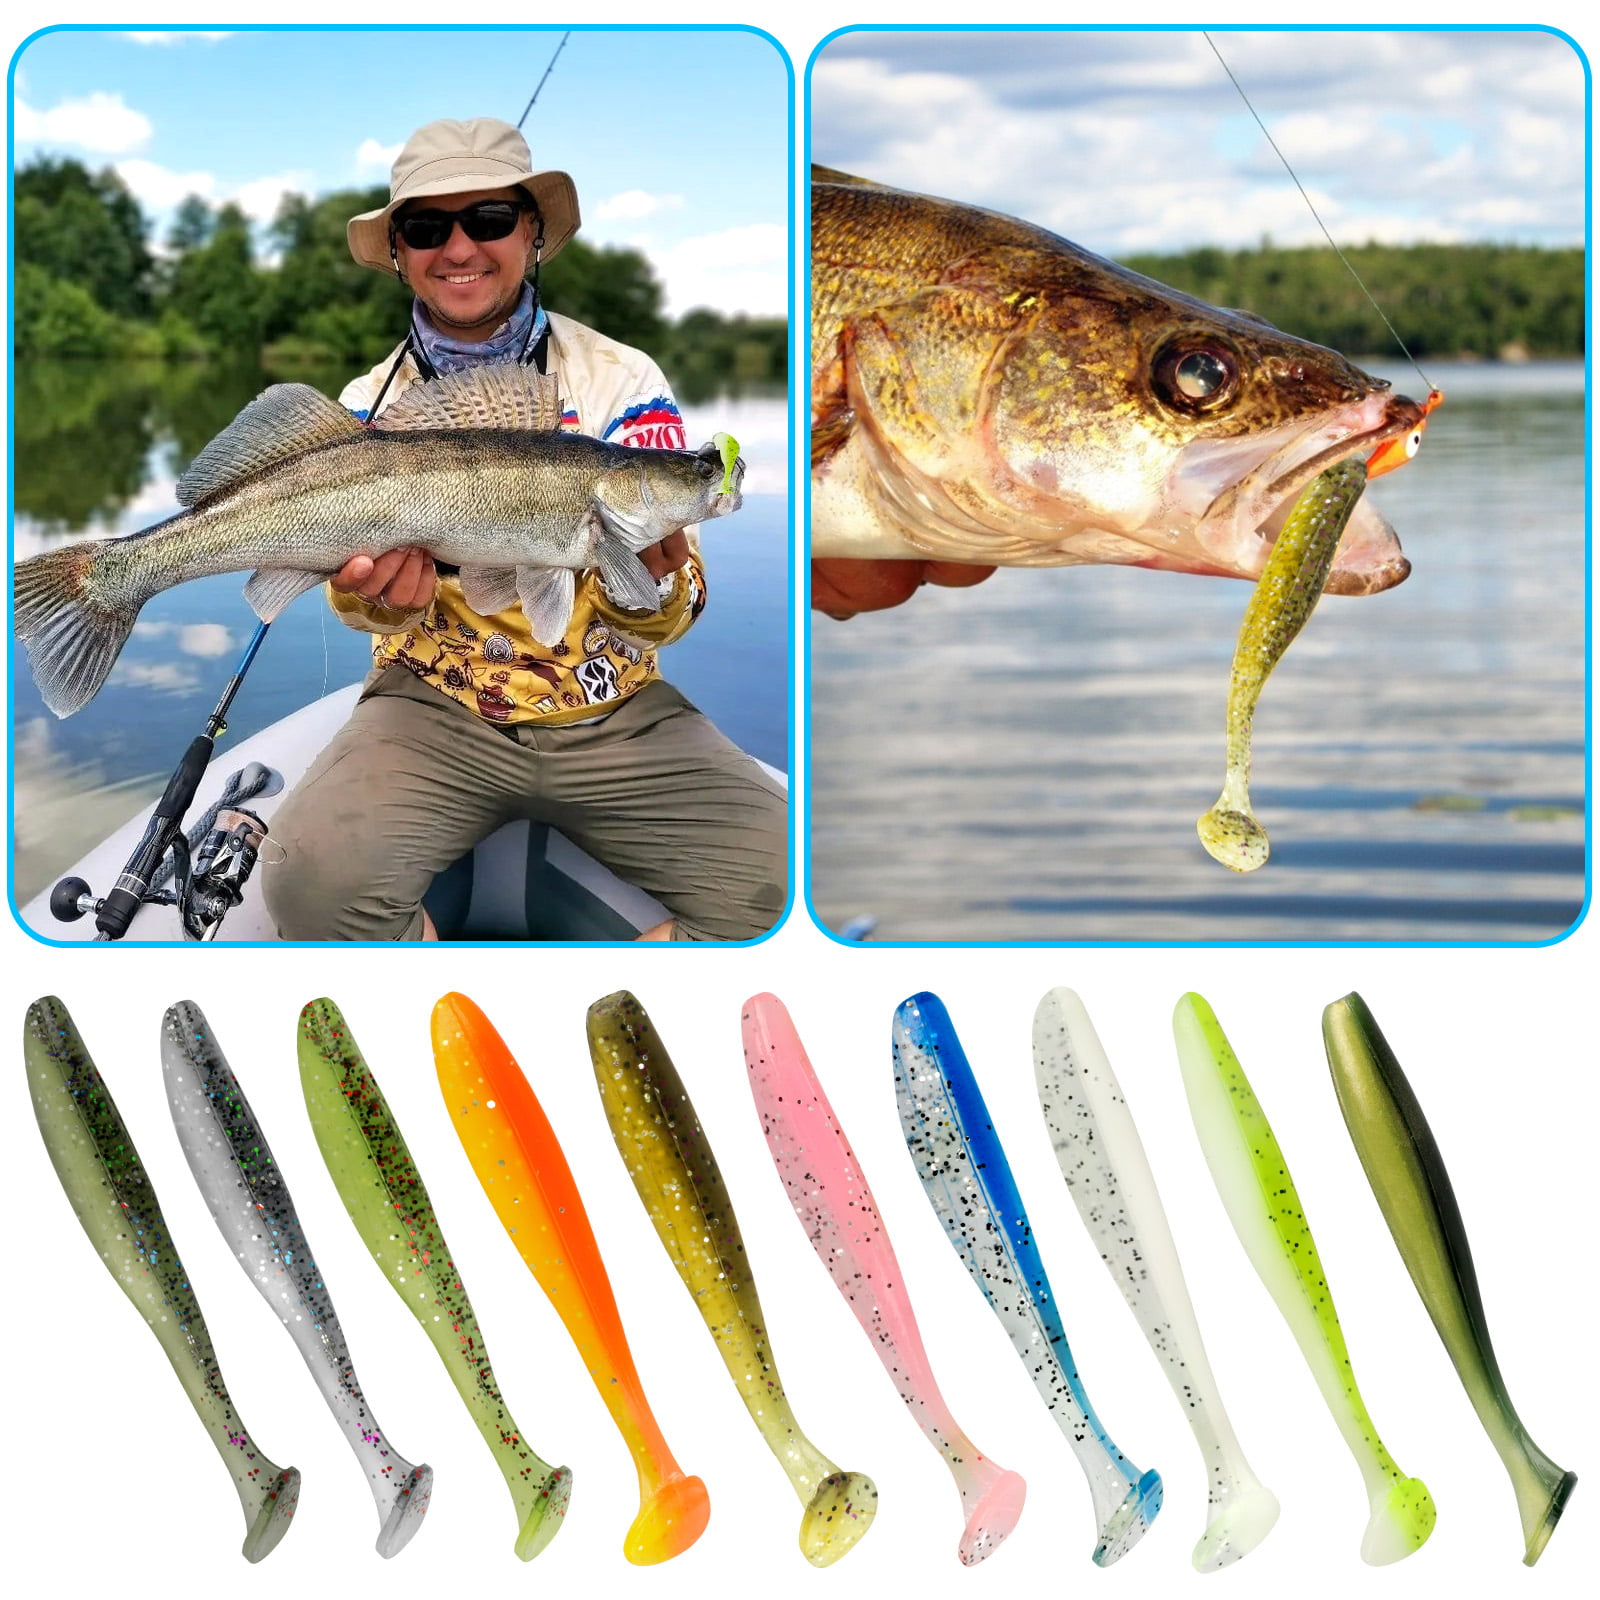 100/50PCS Soft Fishing Lures, TSV 2 T-tail Soft Baits Kit Stinger Shade Grubs  Assorted Mixture Crappie Quiver Tail for Bass, Hook Slot, Trout, Redfish,  Freshwater and Saltwater 